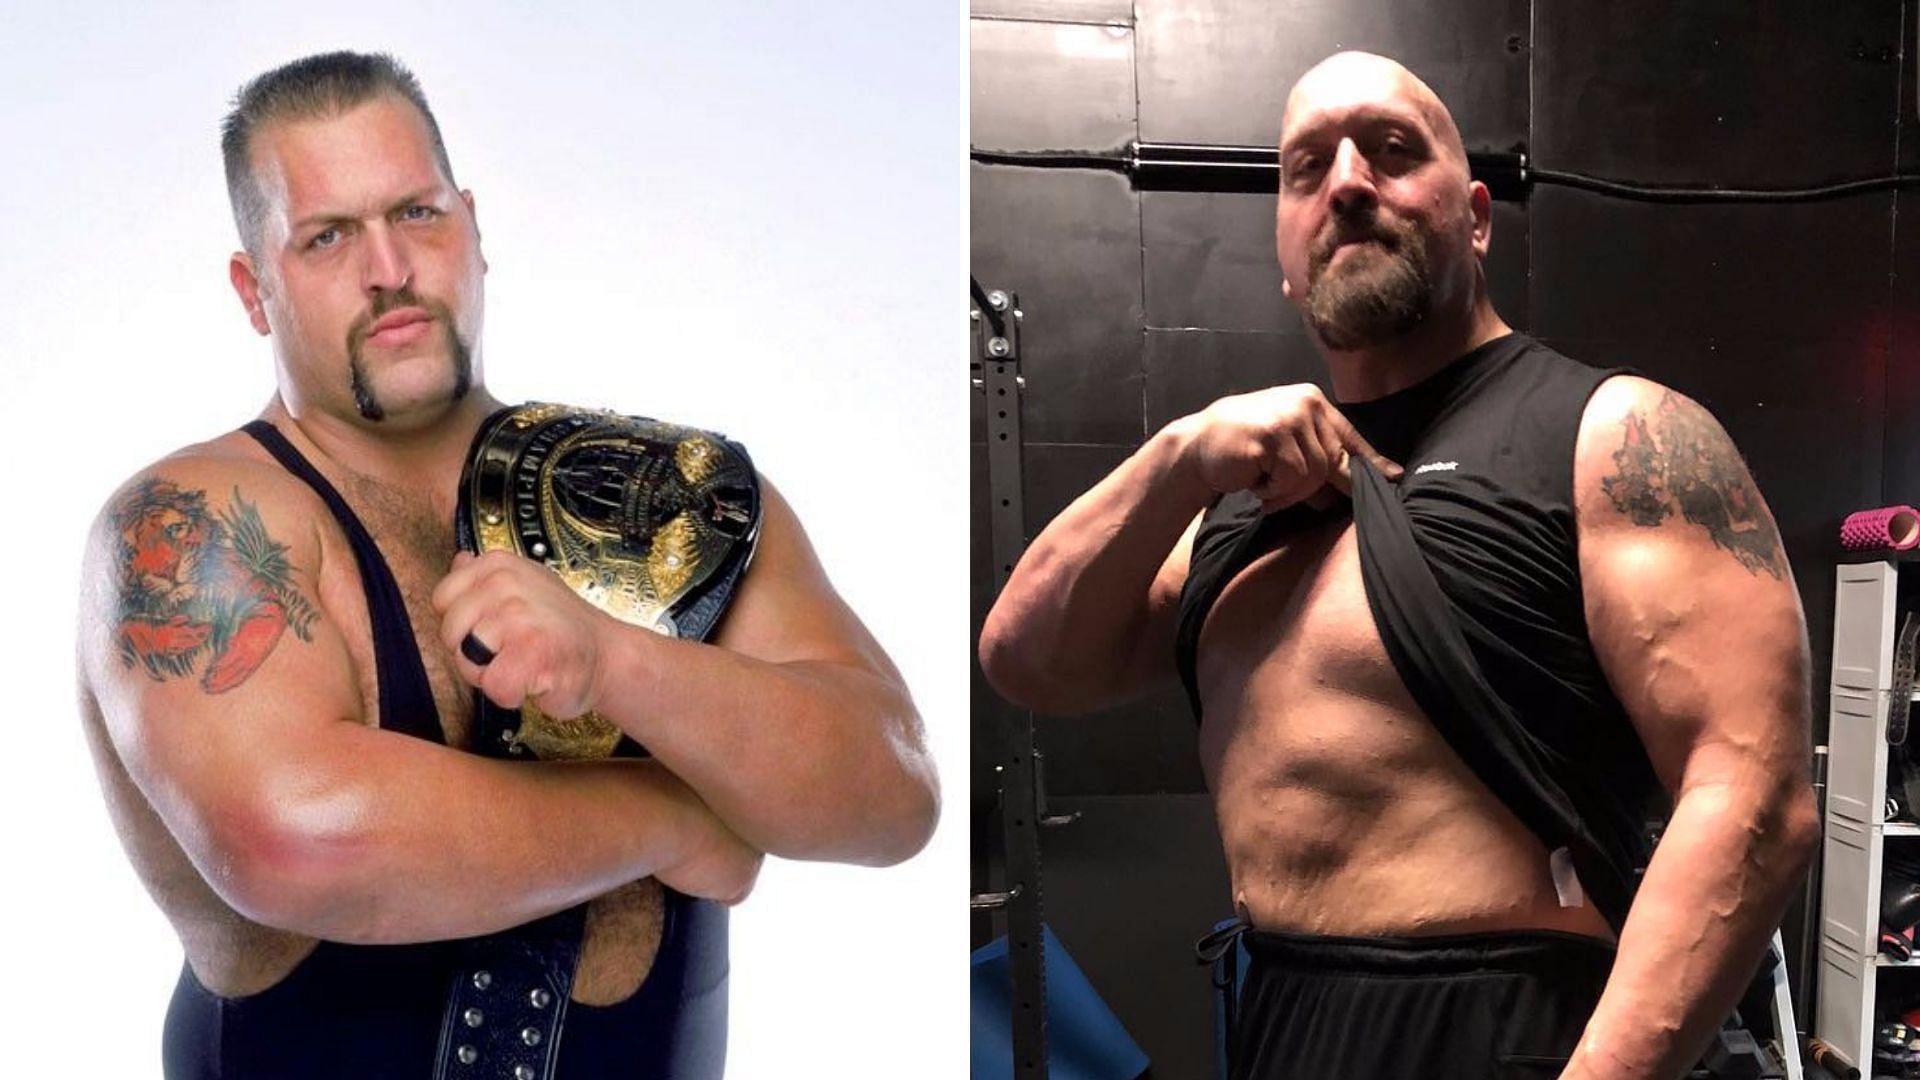 The Big Show, real name Paul Wight, is signed to AEW as of 2022